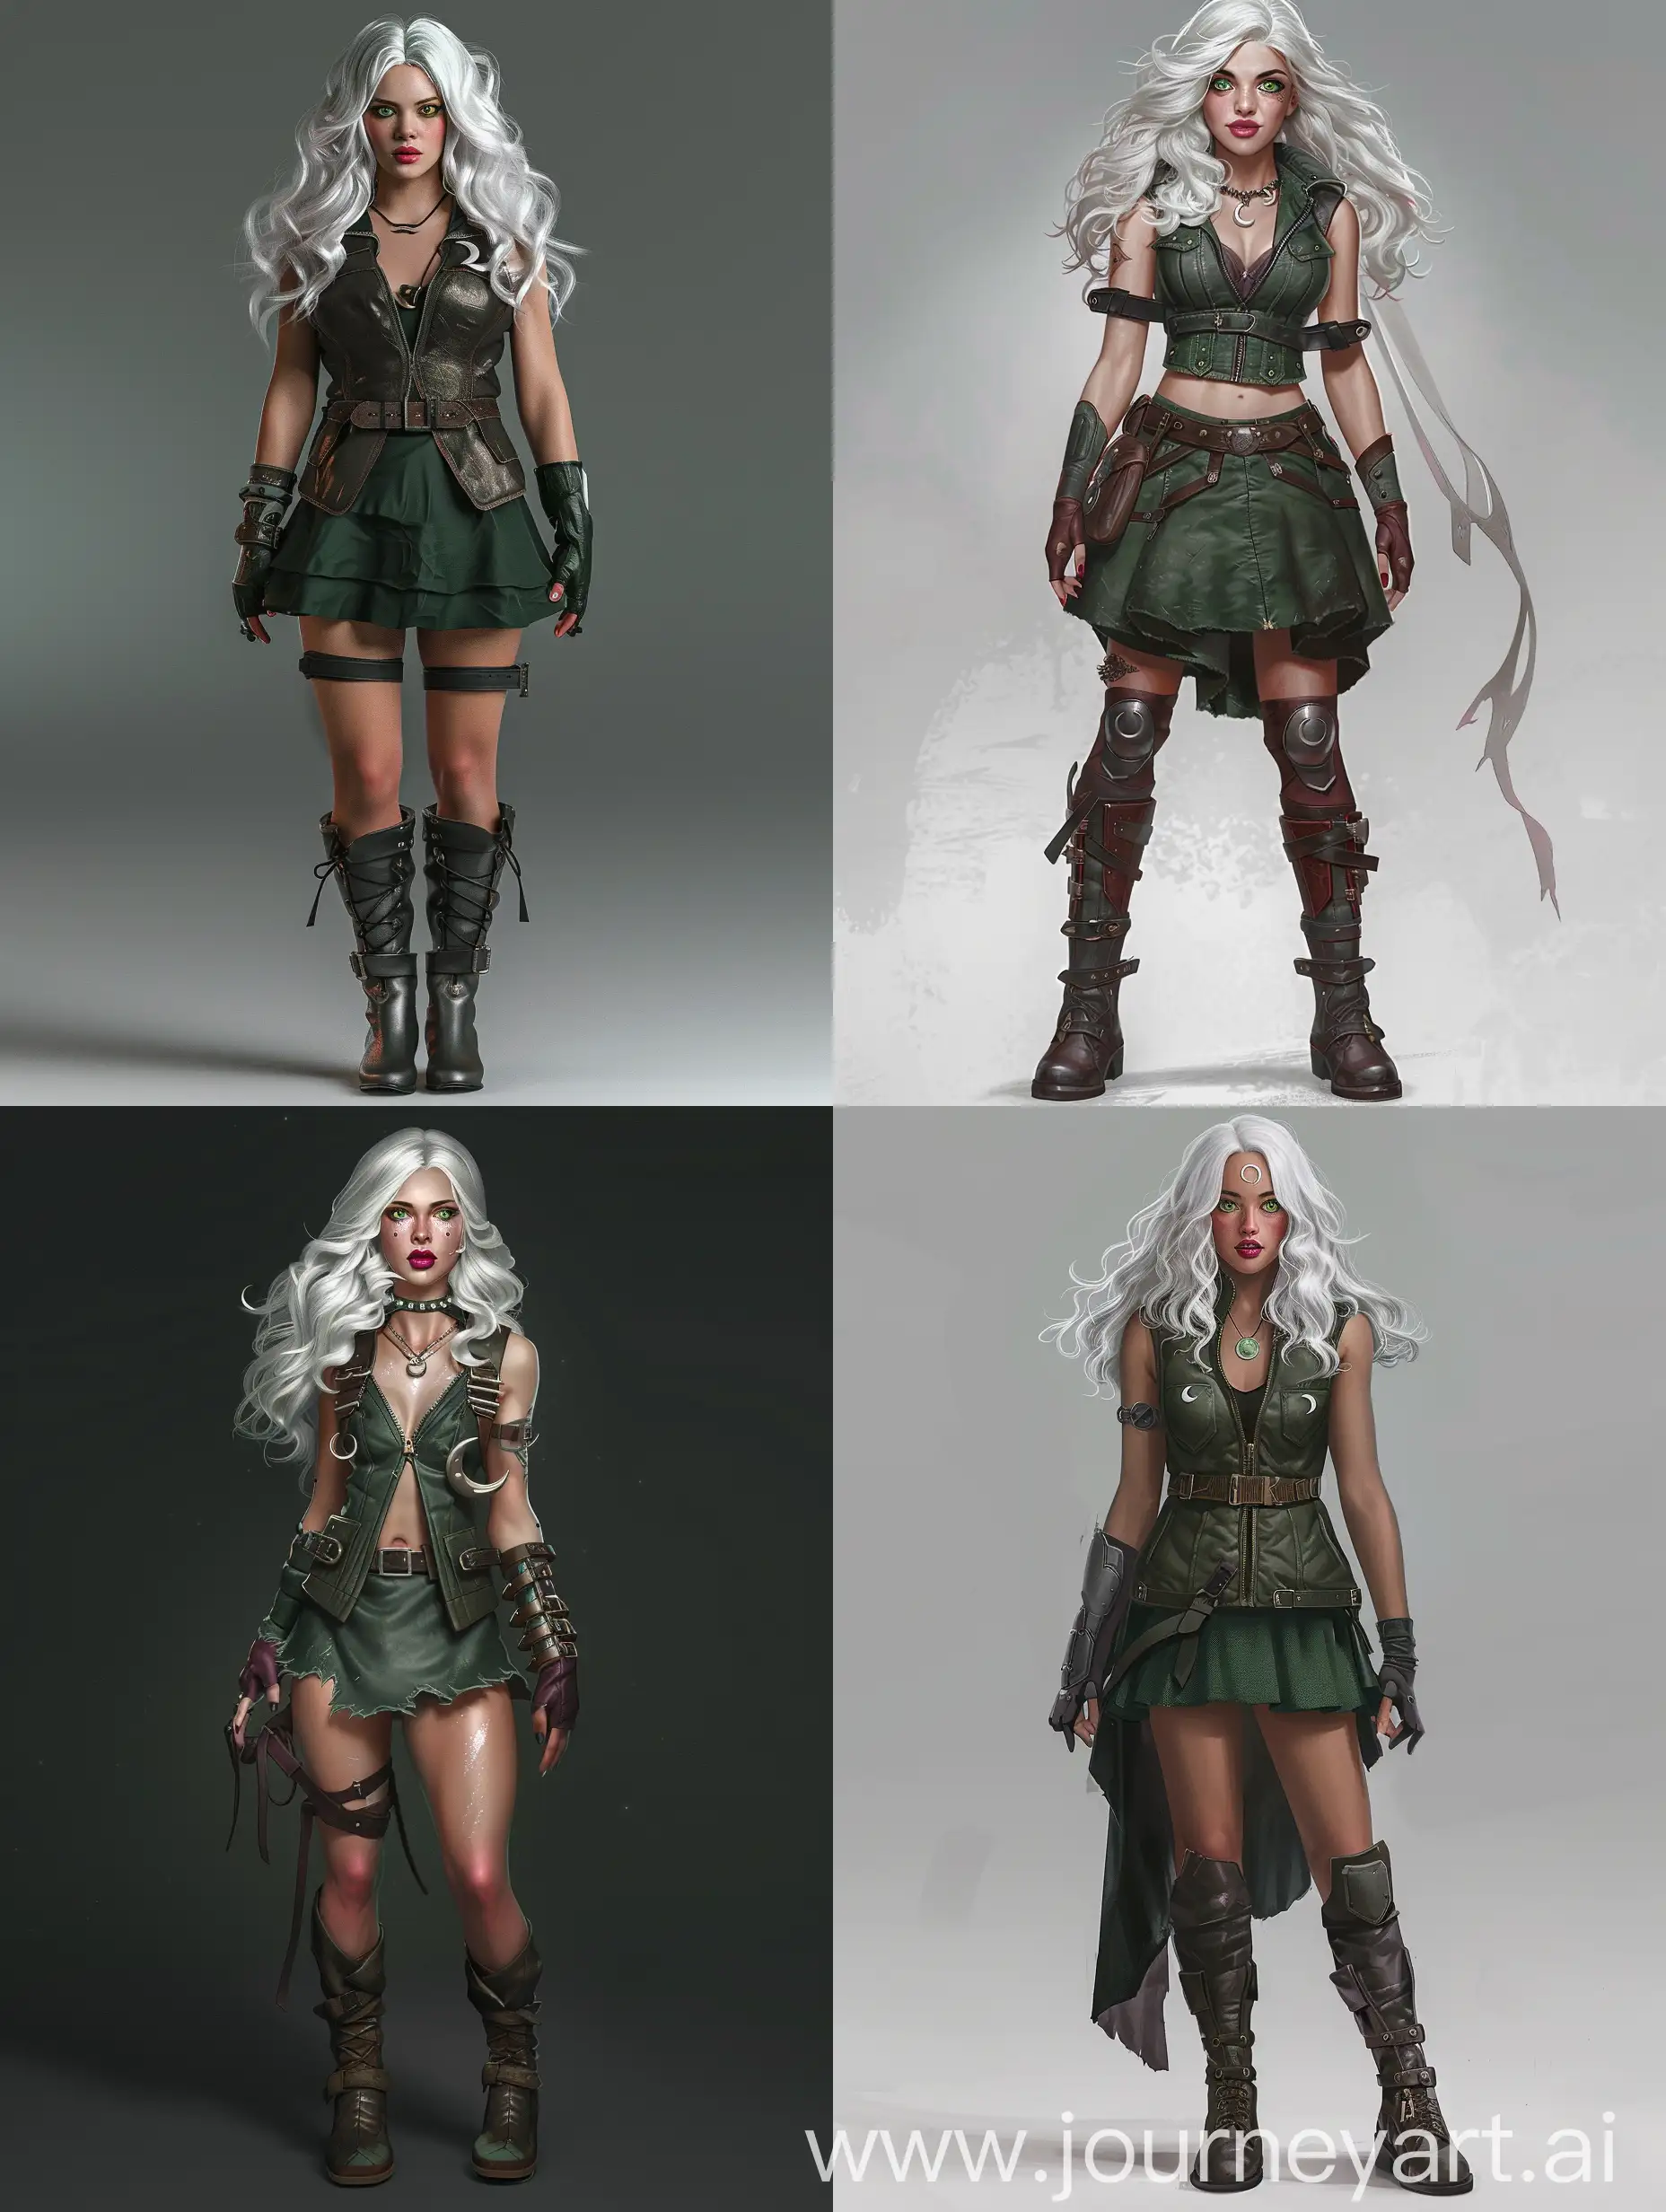 Female lunar sorceress, silver white midlength wavy hair,falling on her shoulders,
light green eyes with crescent moons in her pupils, Plump raspberry-cloroured lips,
Curvy figure, She's dressed in leather hight boots and a dark green dress, protective vest and fingerless gloves